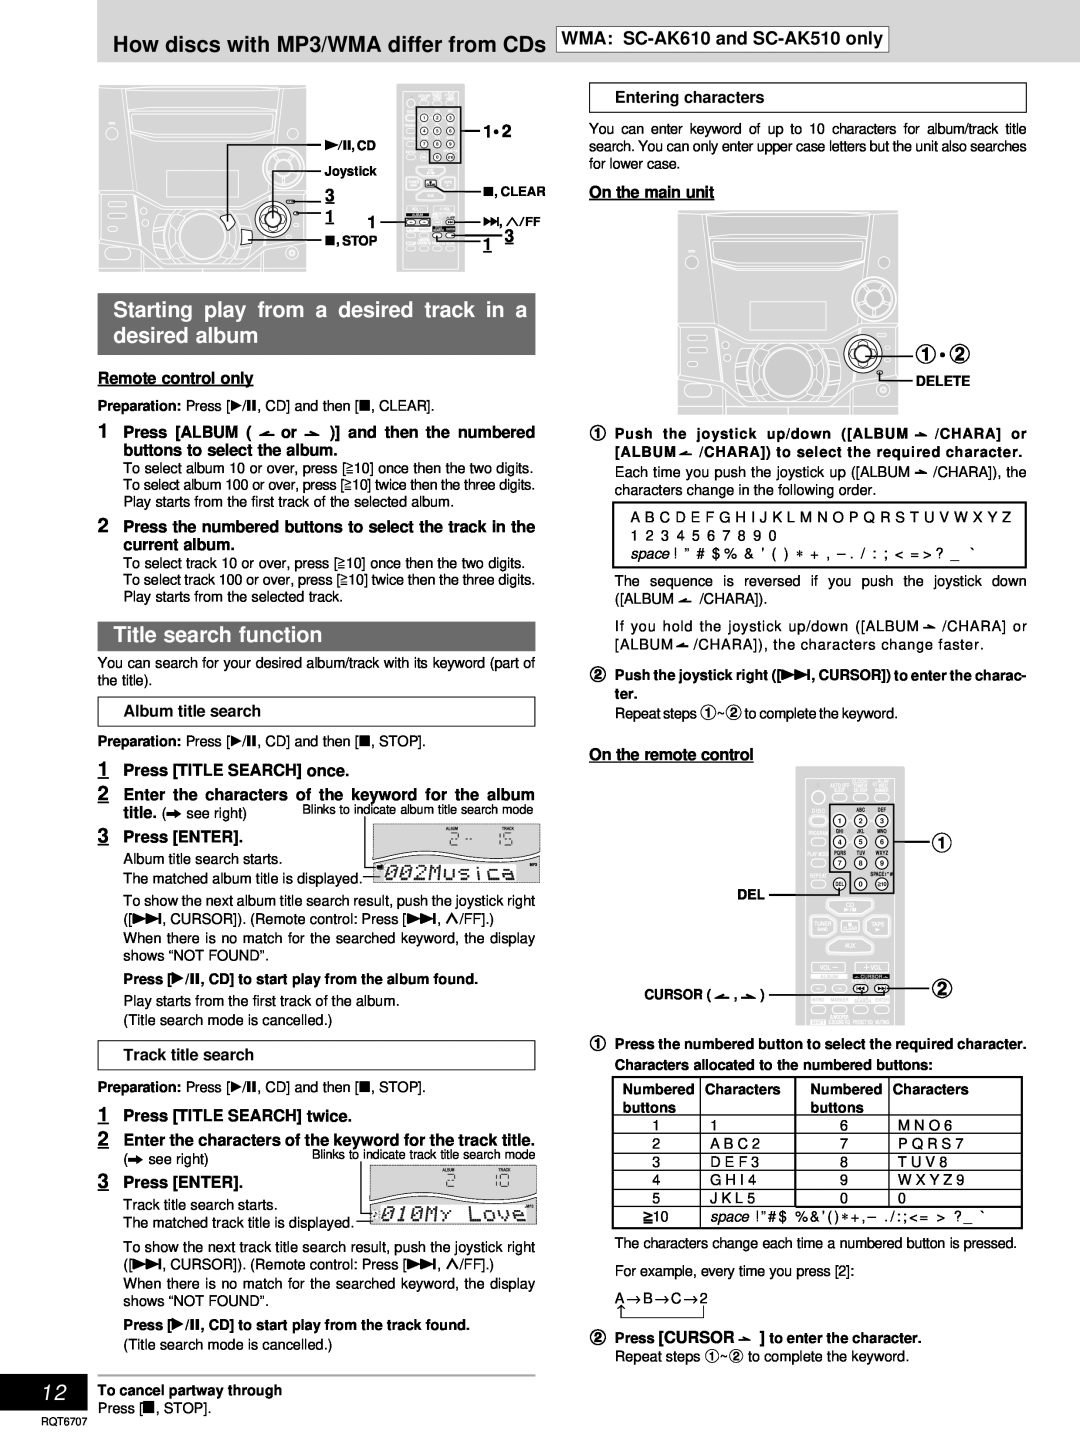 Panasonic SC-AK410 manual How discs with MP3/WMA differ from CDs, Title search function, WMA SC-AK610and SC-AK510only 